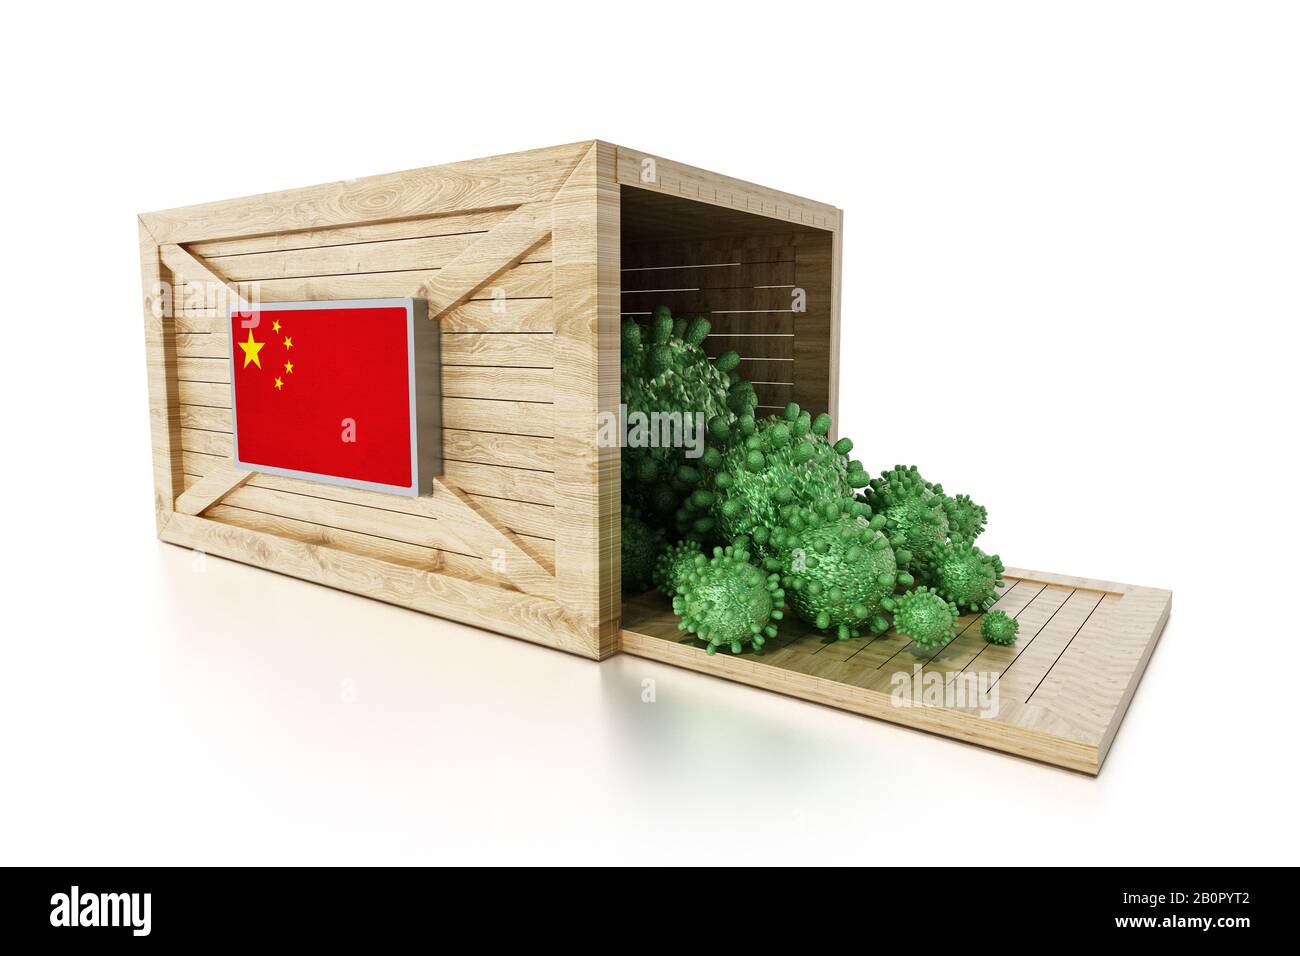 Group of viruses on china map and flag. 3D illustration. Stock Photo